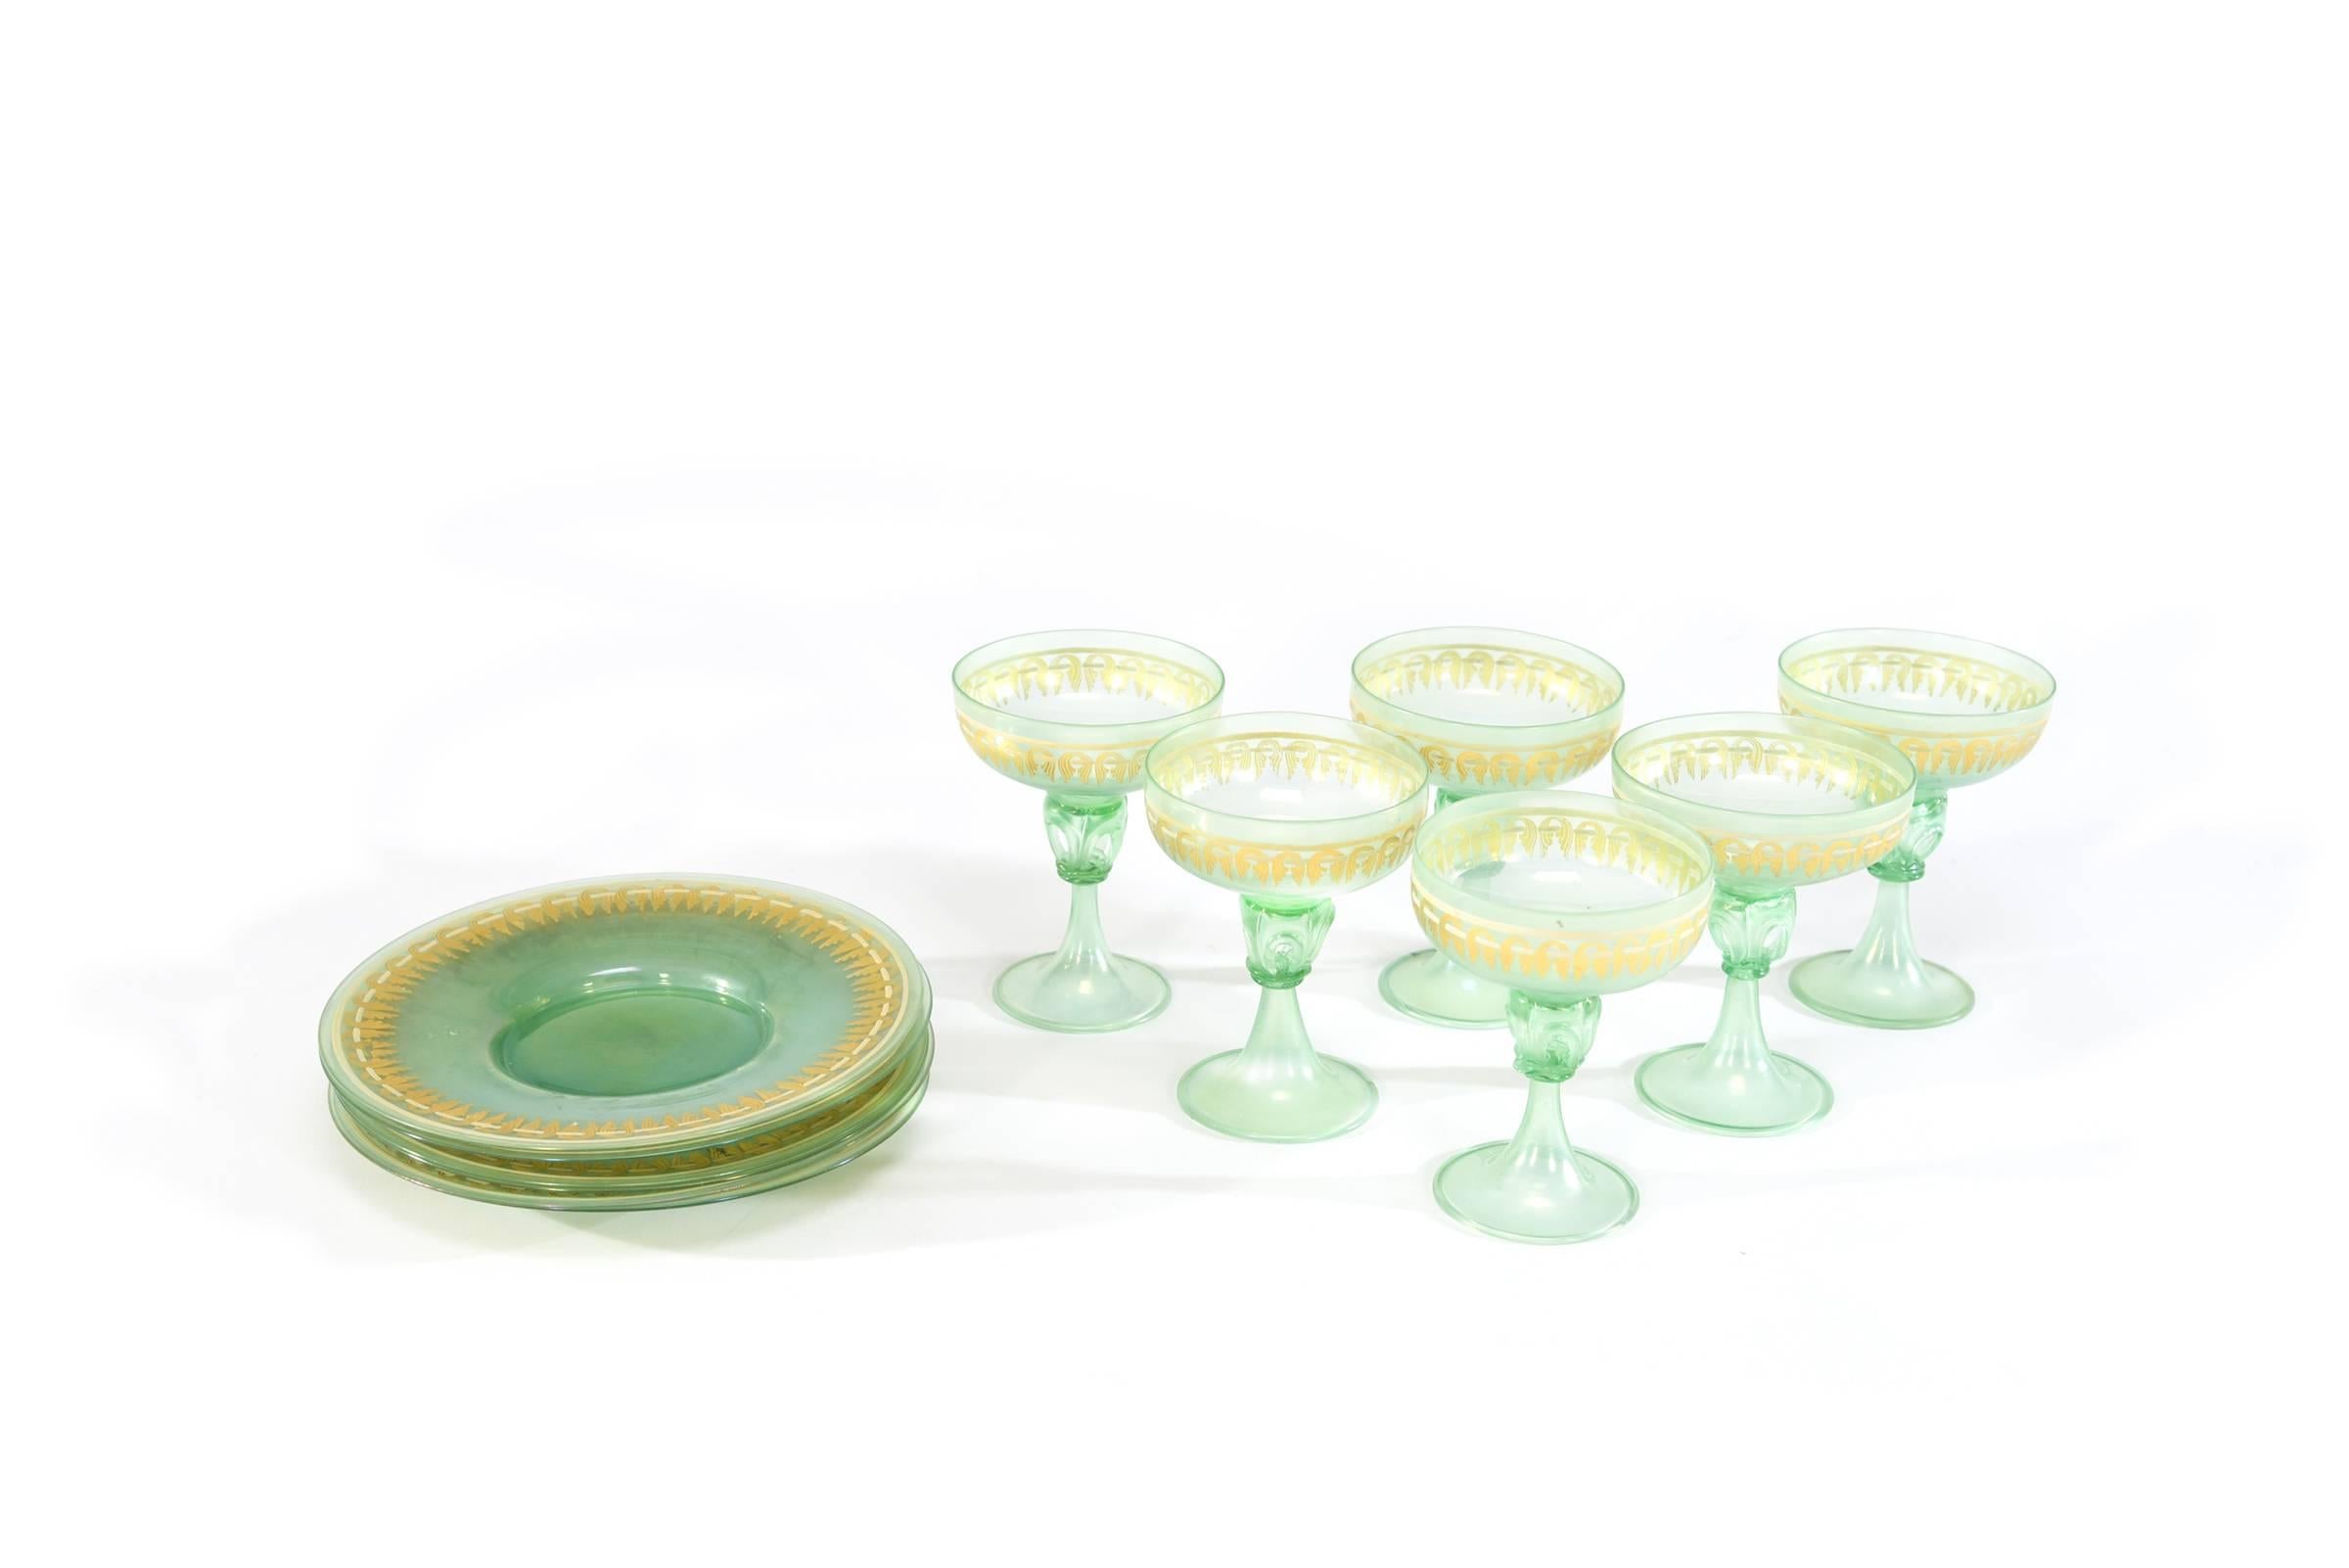 6 Iridescent Green Gold Enamel Venetian Footed Dessert Coupes & Underplates In Good Condition For Sale In Great Barrington, MA